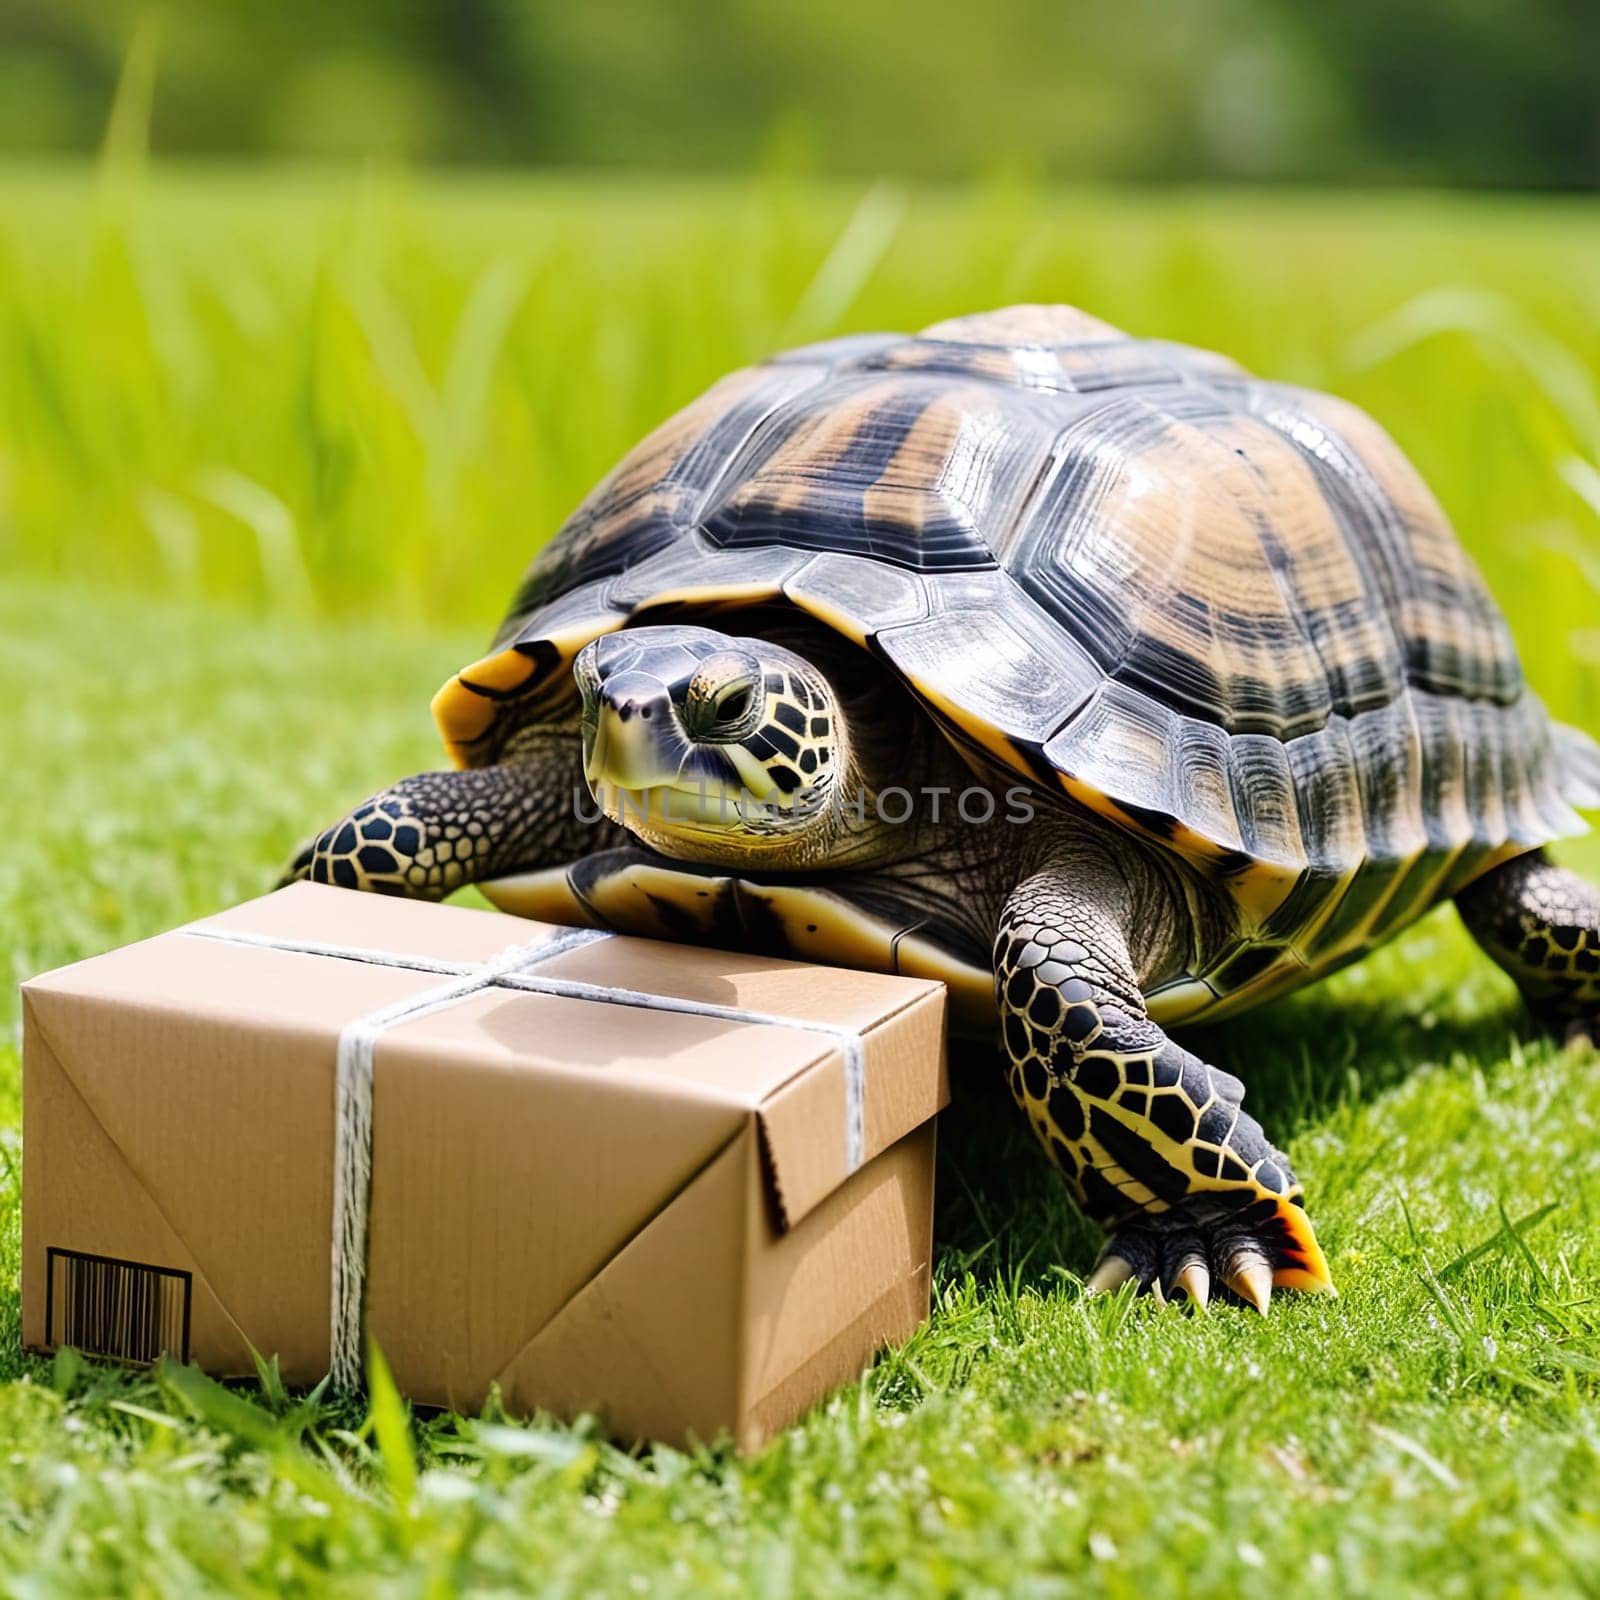 Turtle with a package on grass by Ladouski